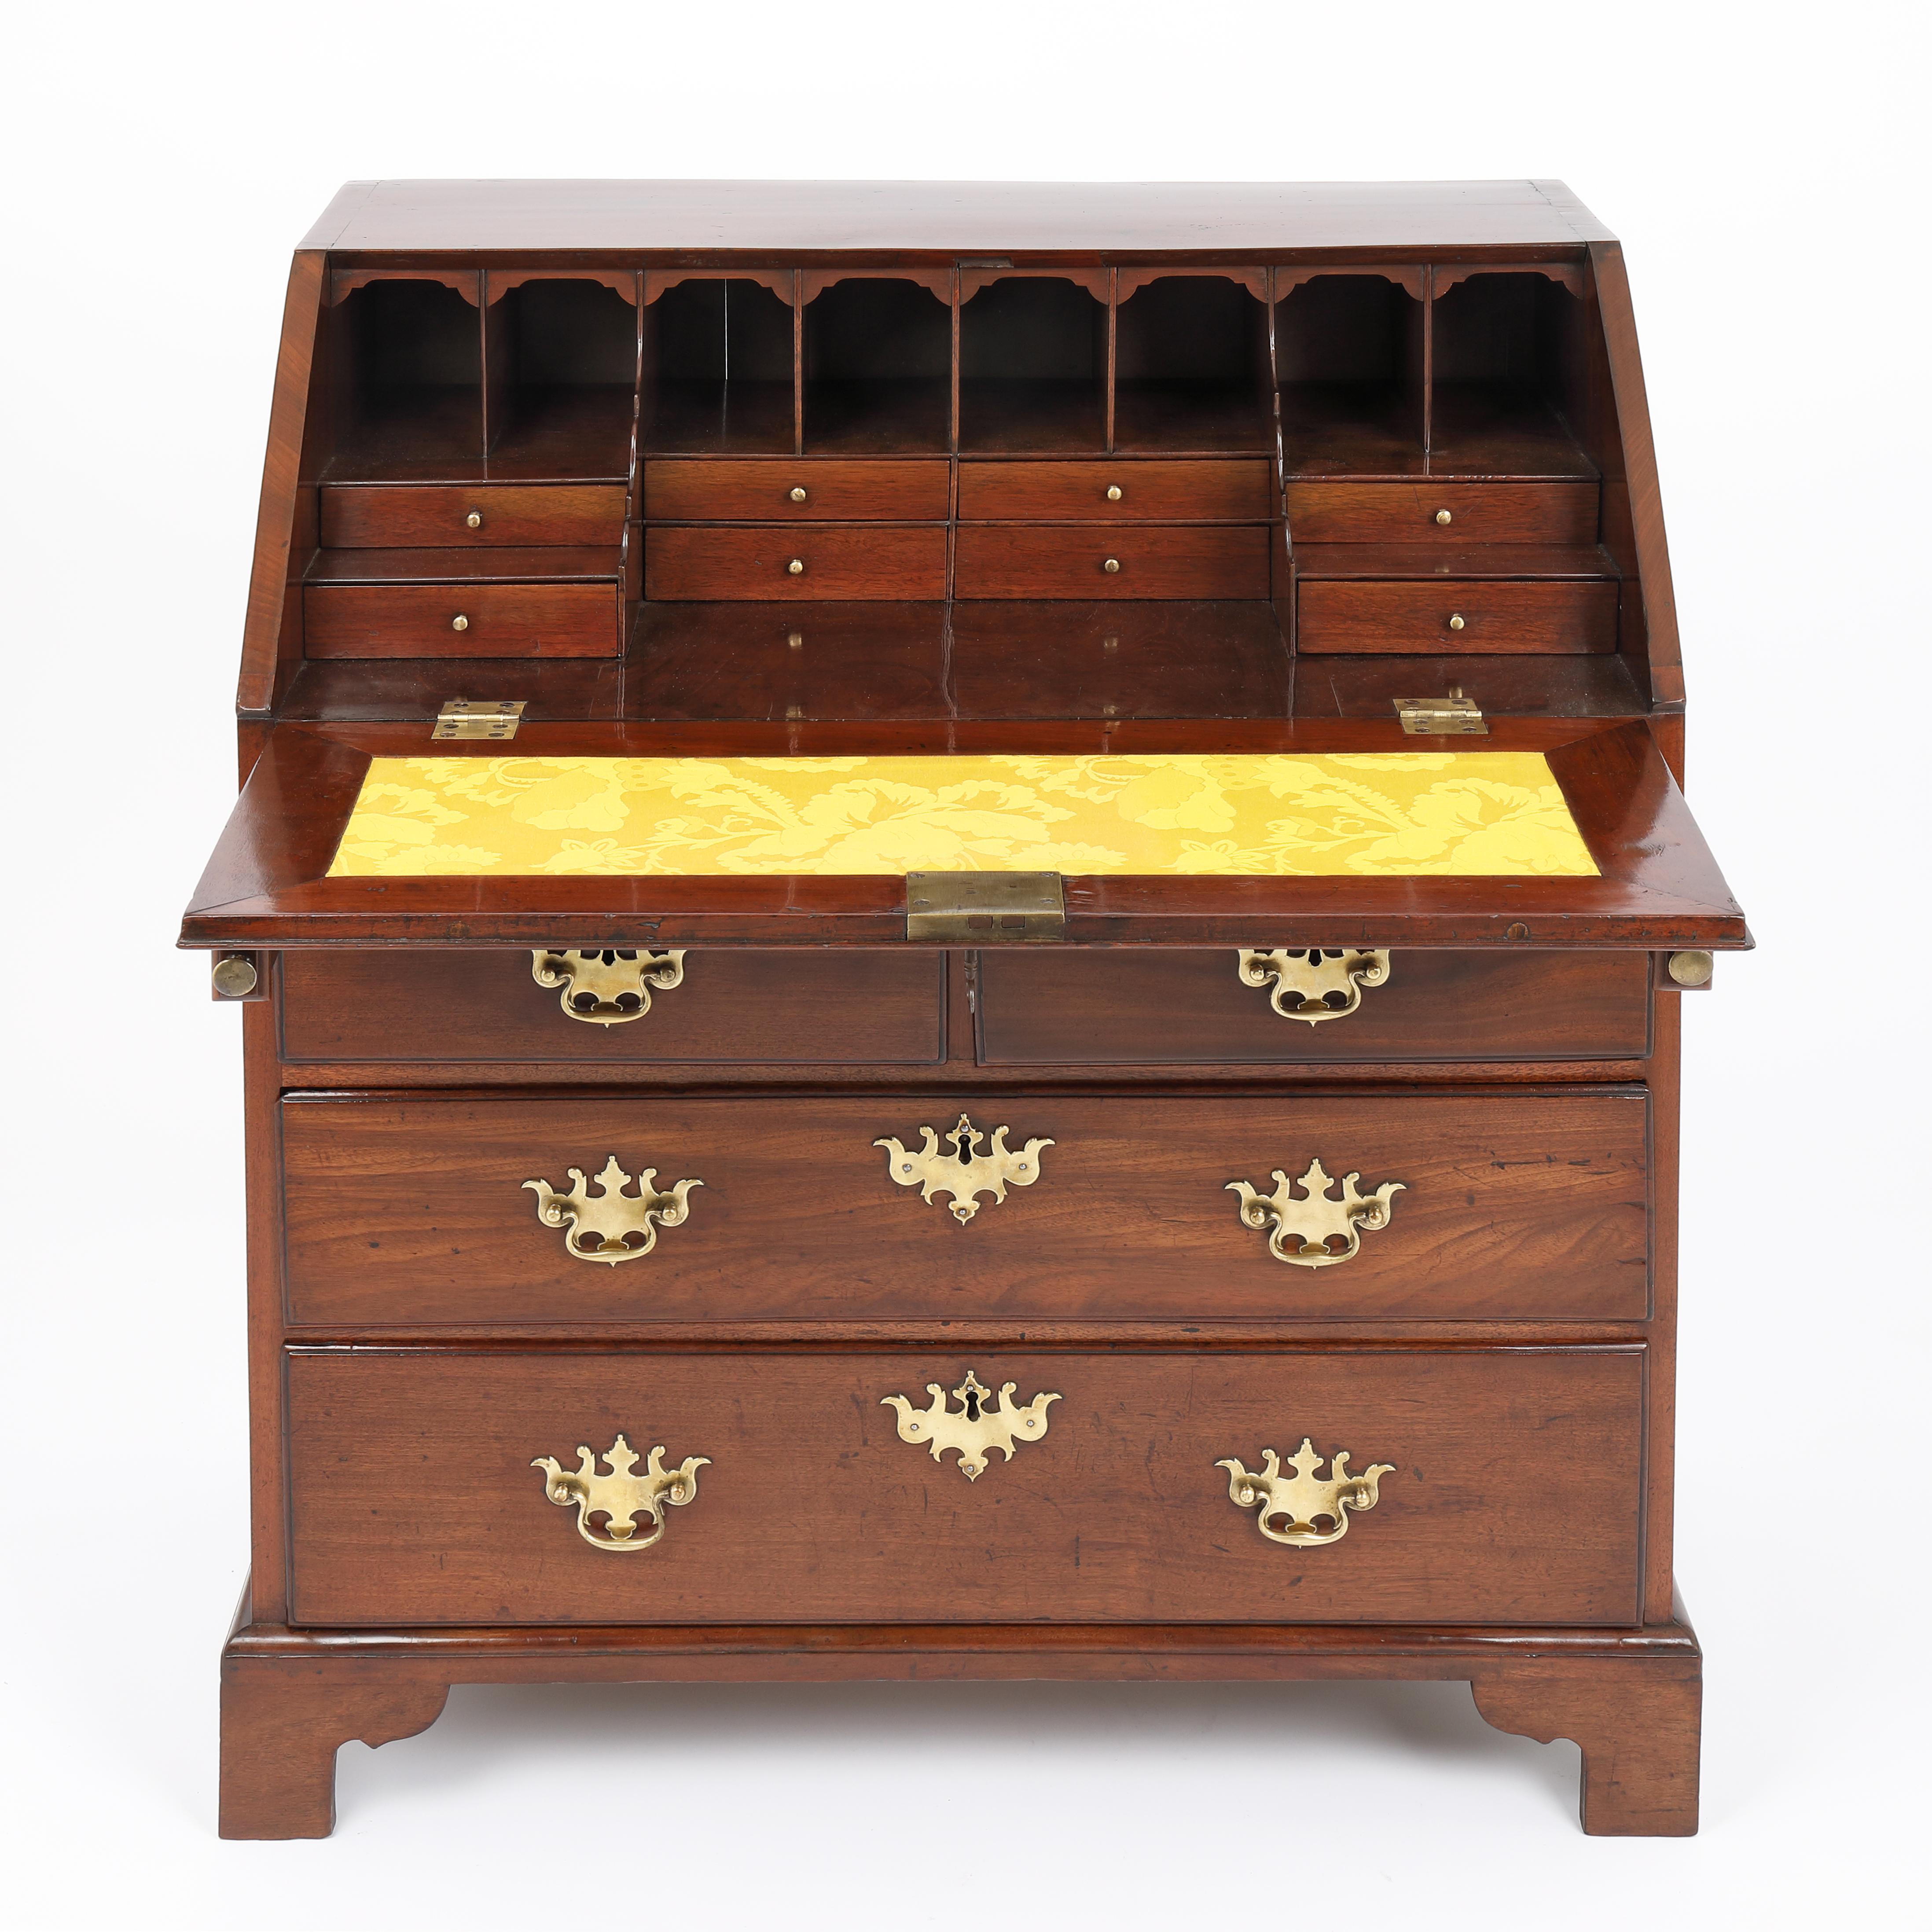 An exceptionlal and very rare Qianlong period Chinese export Bureur, Constructed in Hauli and Huanghuali wood in China during the first half of the 18th century for a wealthy Englishman, to an English design of the period. 
This bureu is in superb